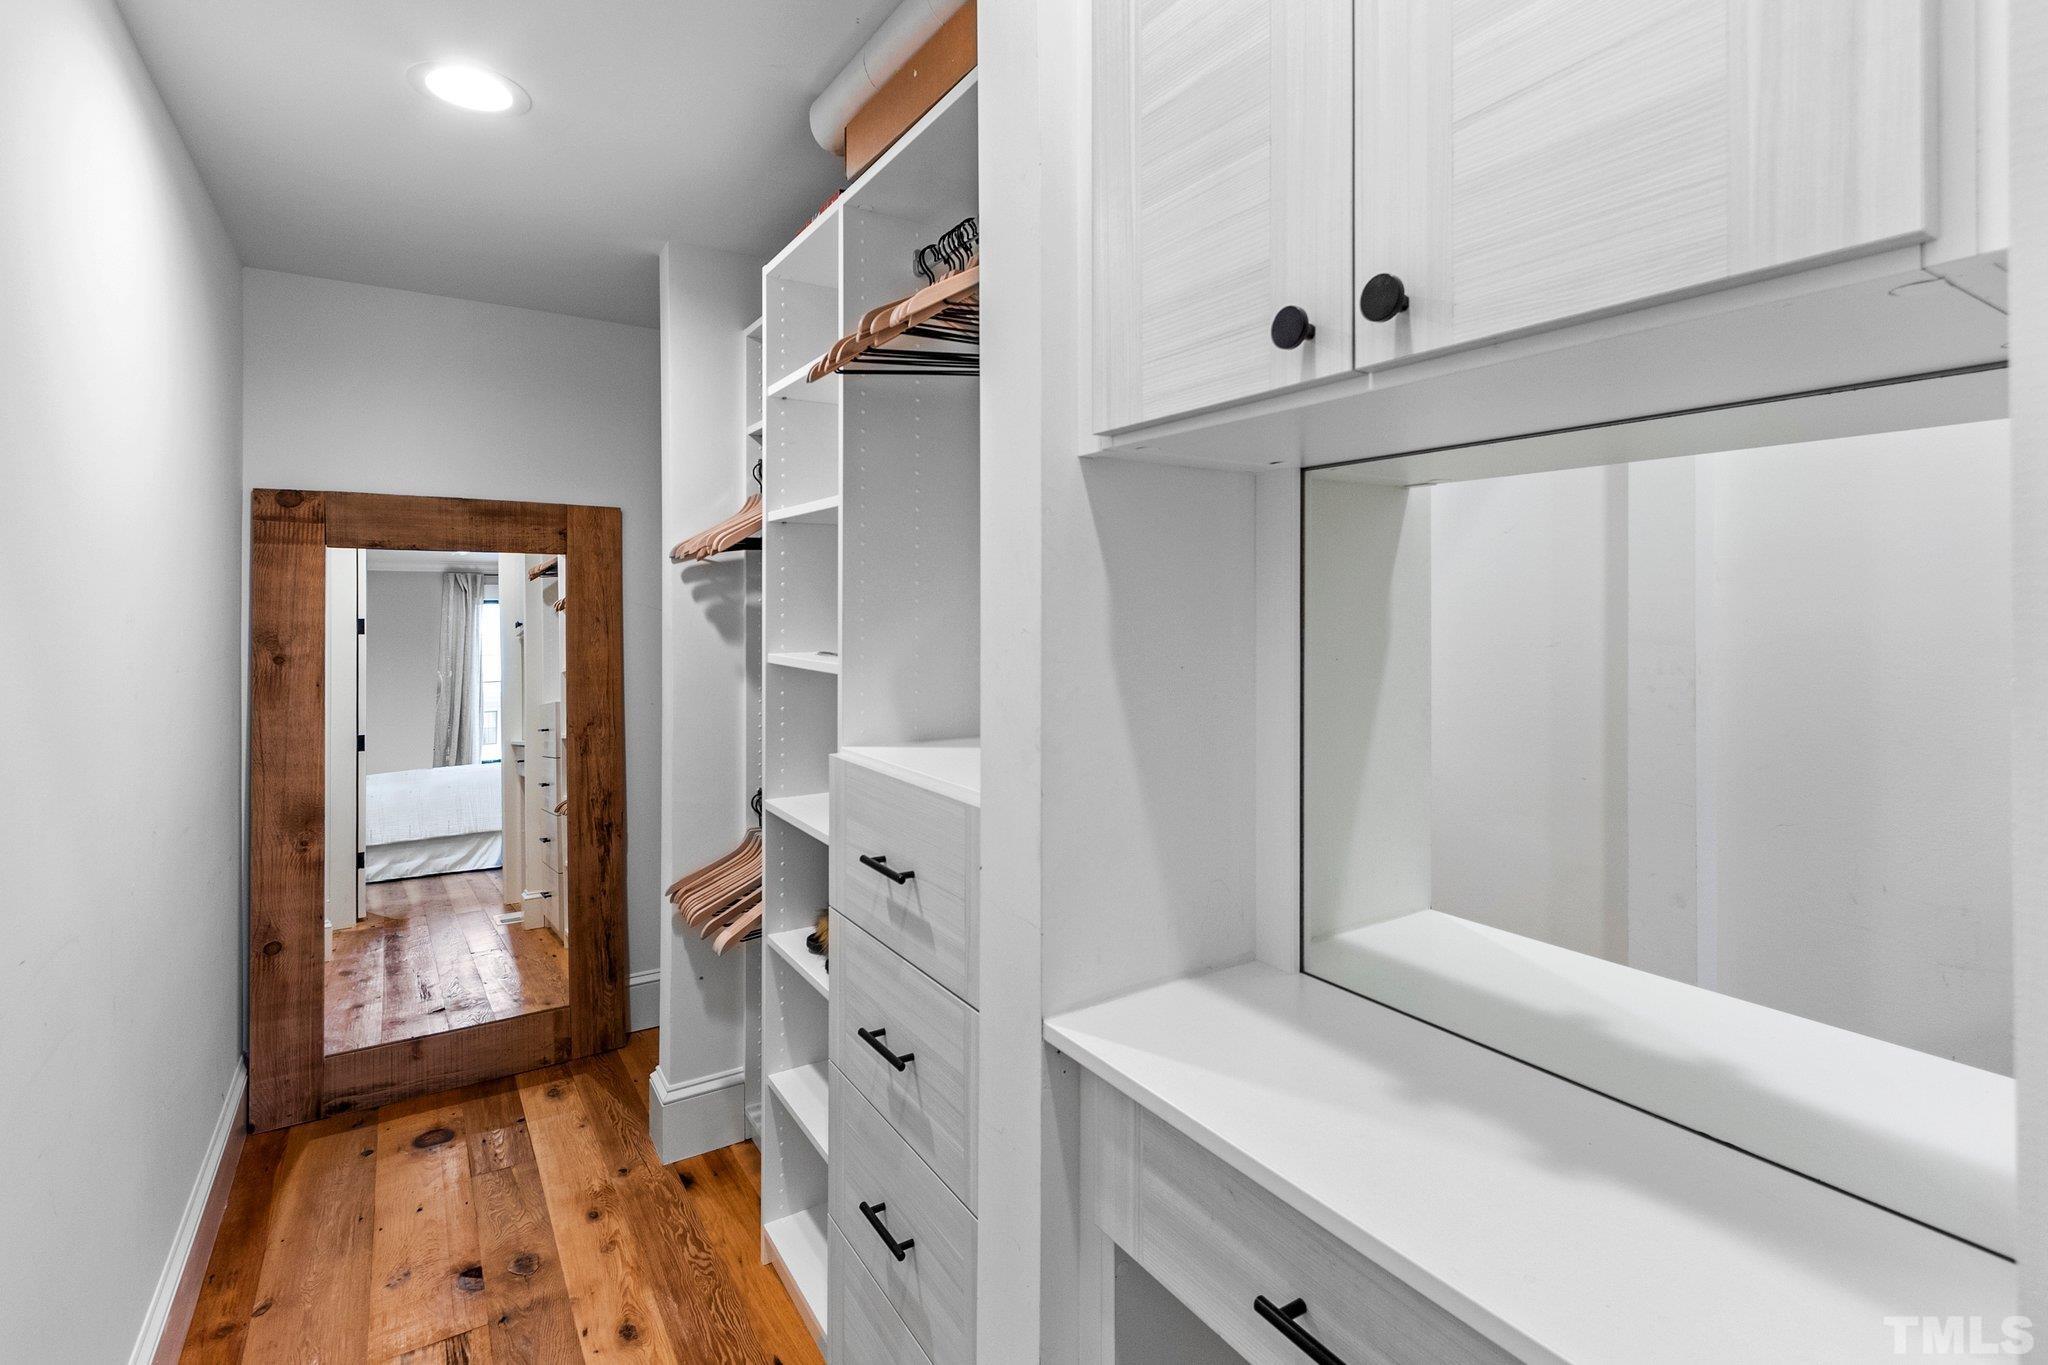 Walk-in Closet in first floor bedroom suite, complete with custom built-in shelving and cabinets.